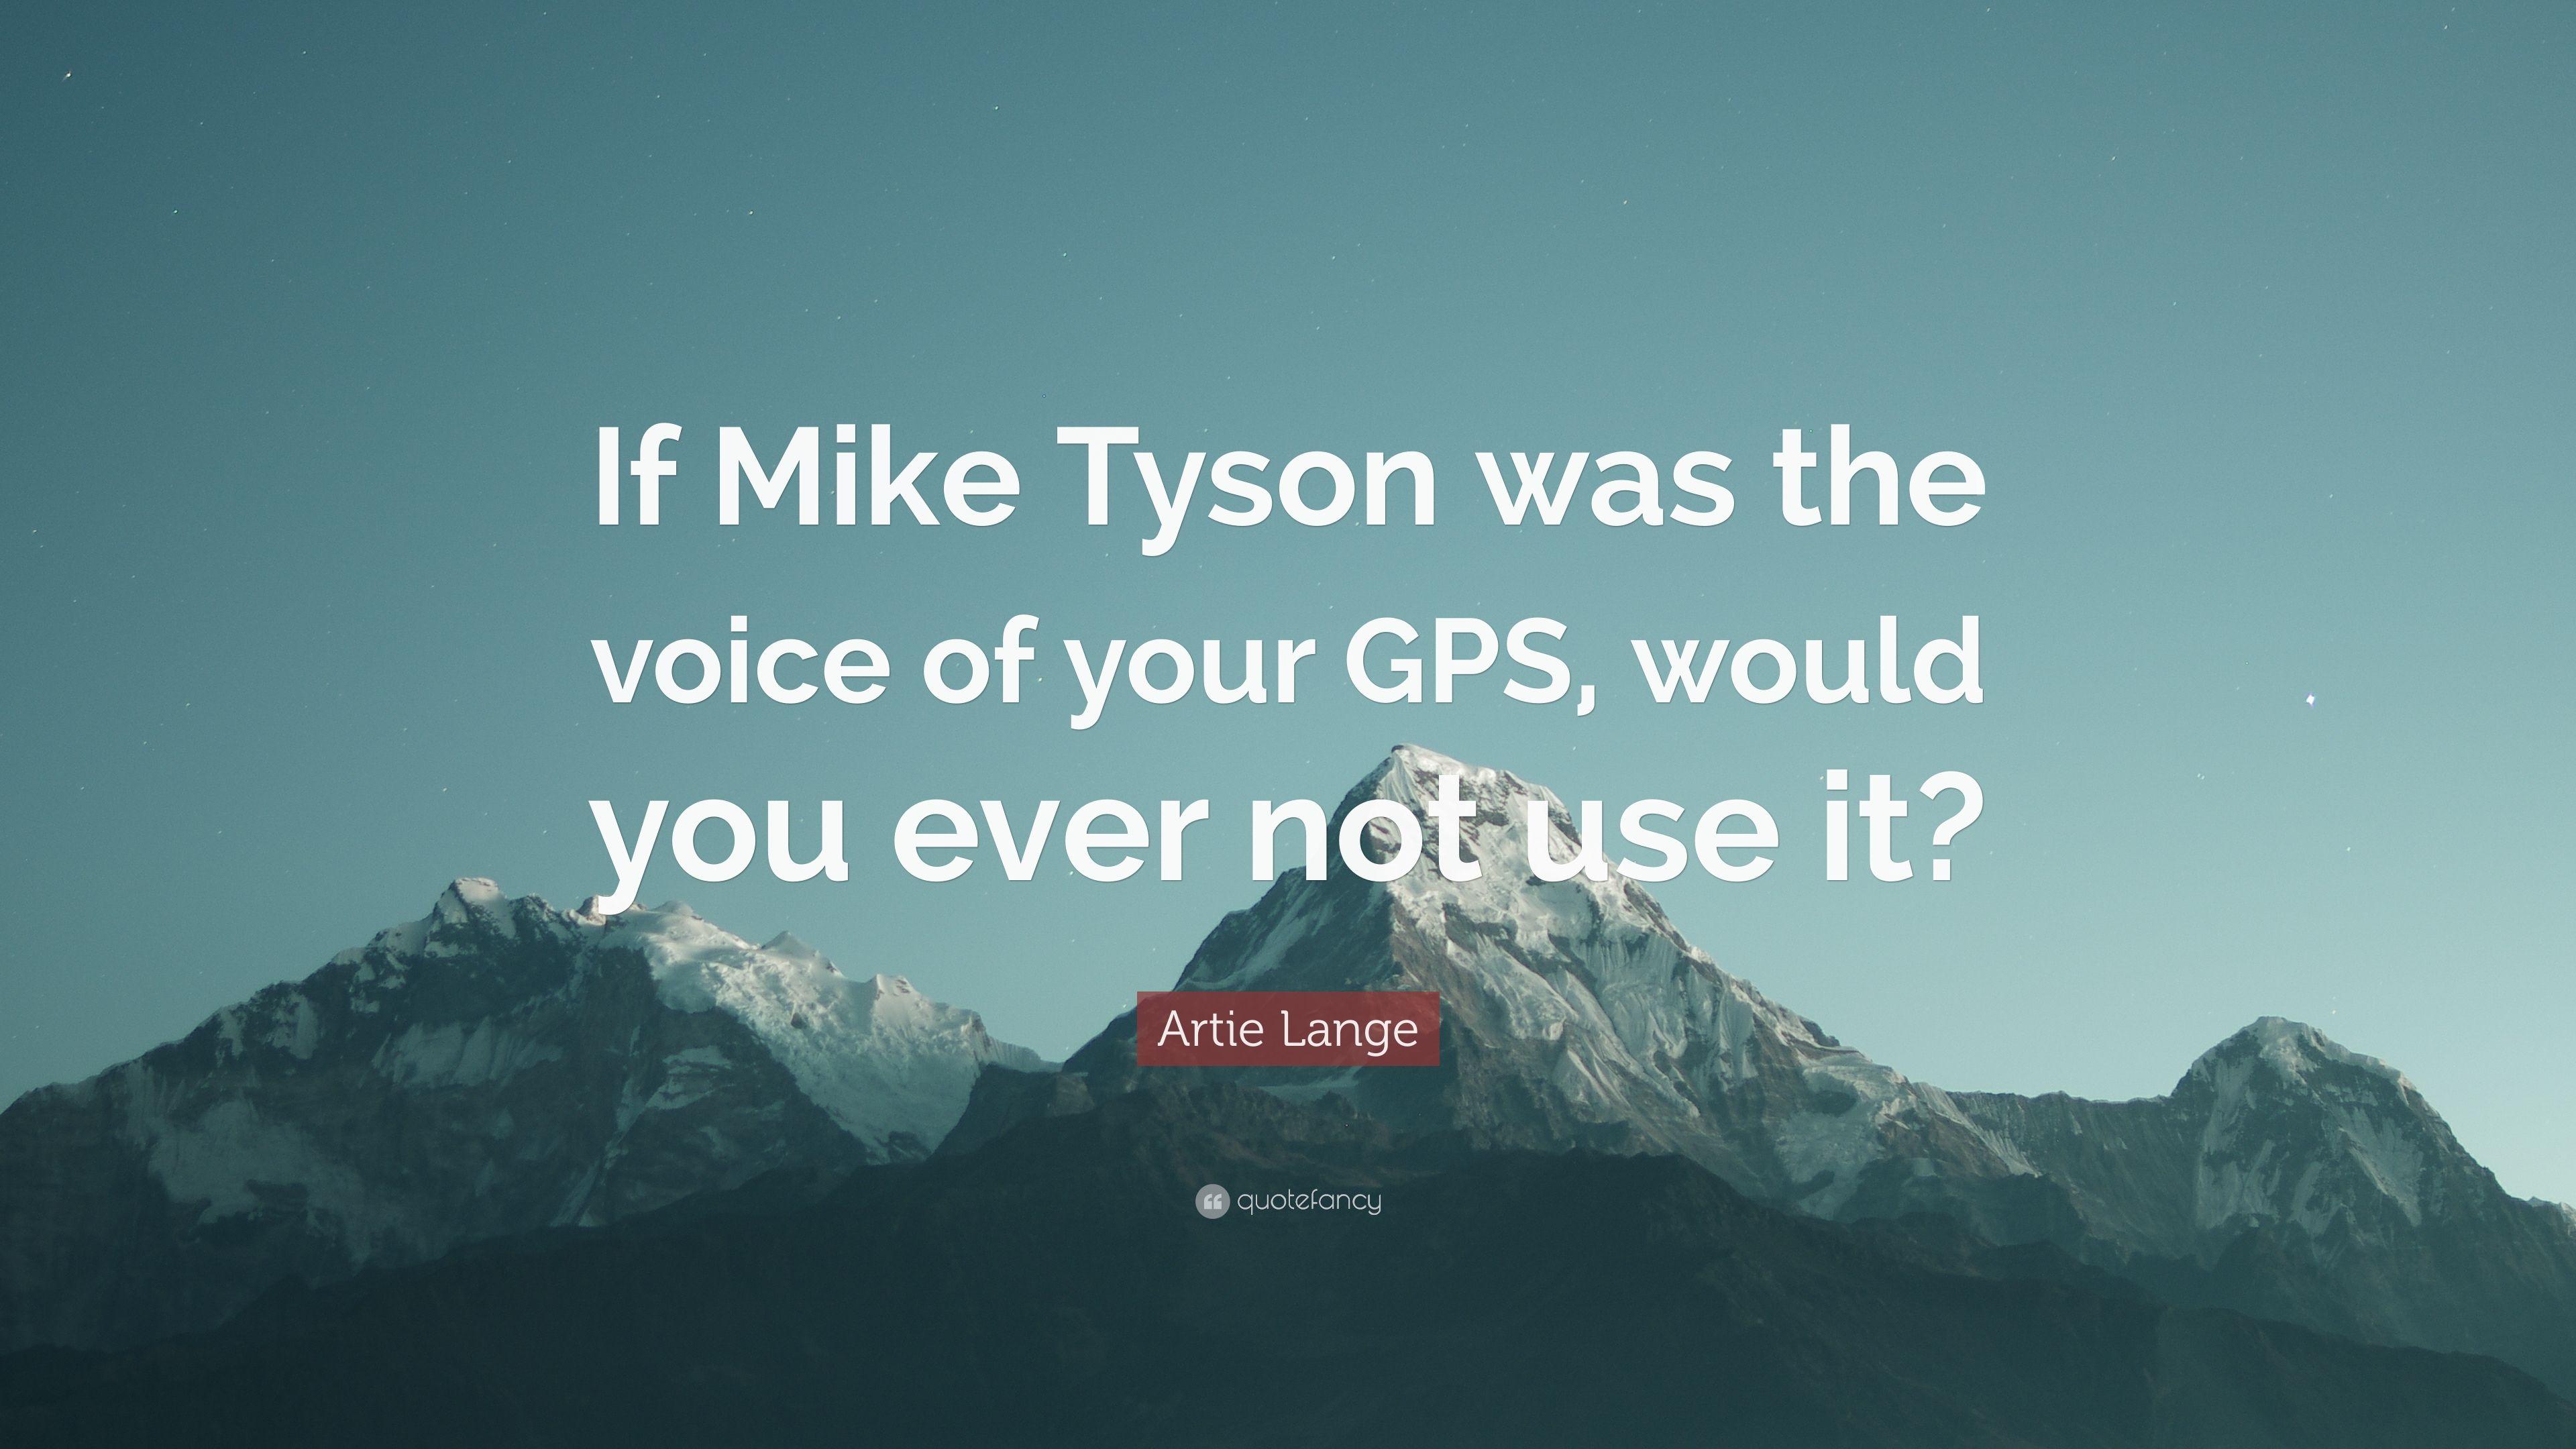 Artie Lange Quote: “If Mike Tyson was the voice of your GPS, would